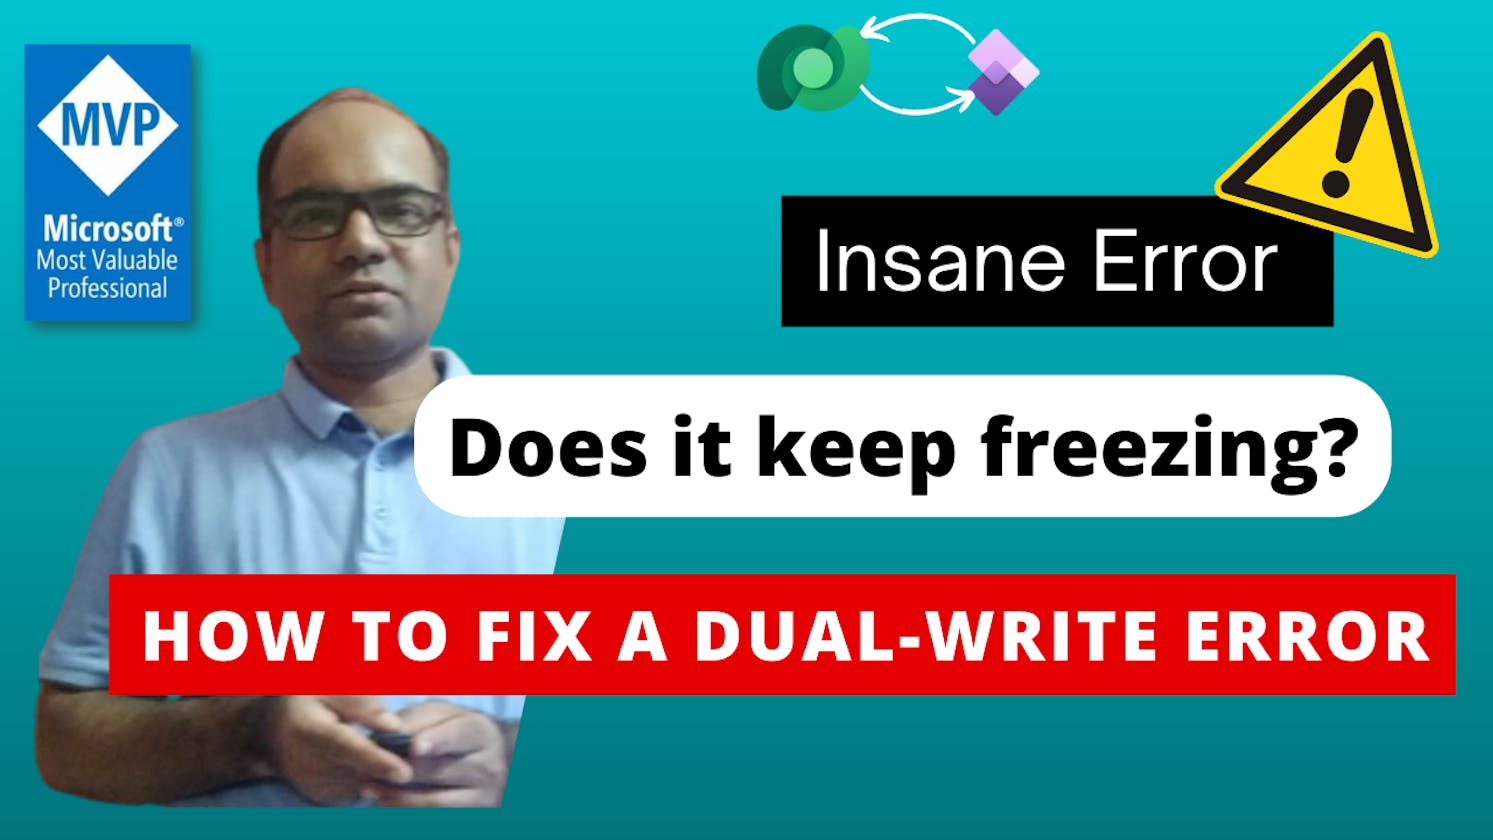 Dual-write: Types of Errors and How to Fix them